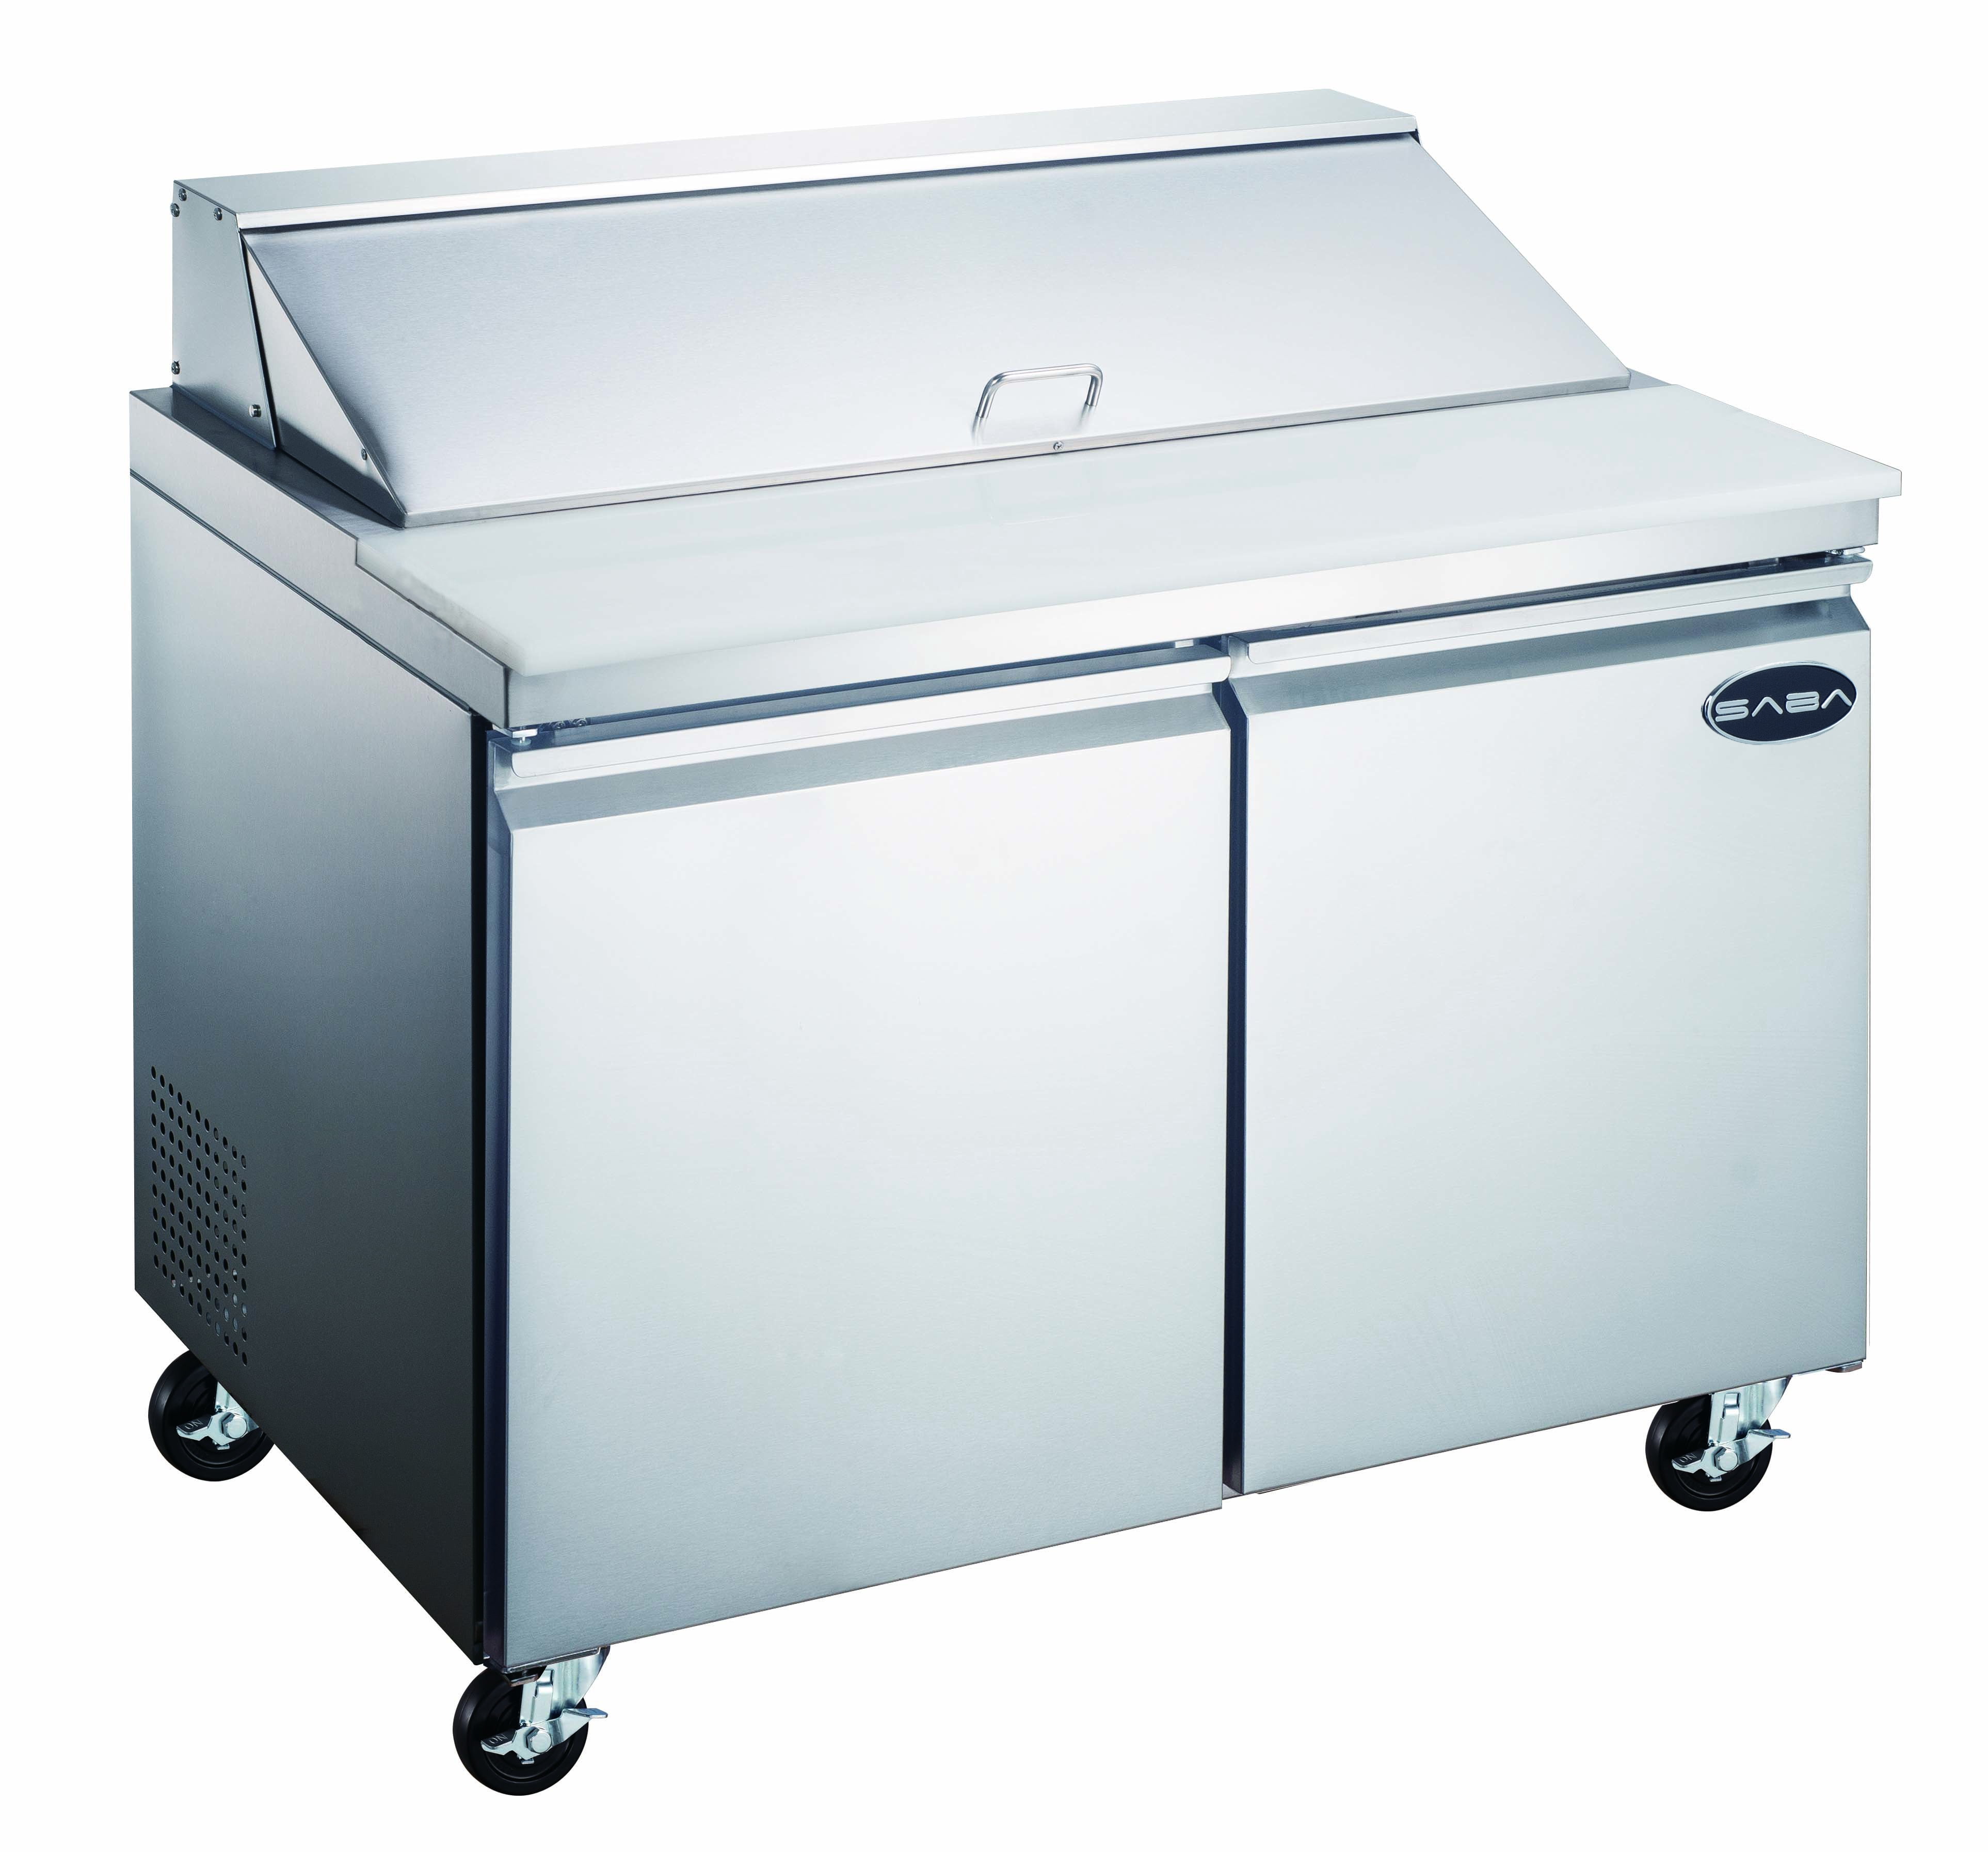 New 48" Sandwich Salad Prep Table 4 ft Commercial Refrigerator 12 Stainless Pans 